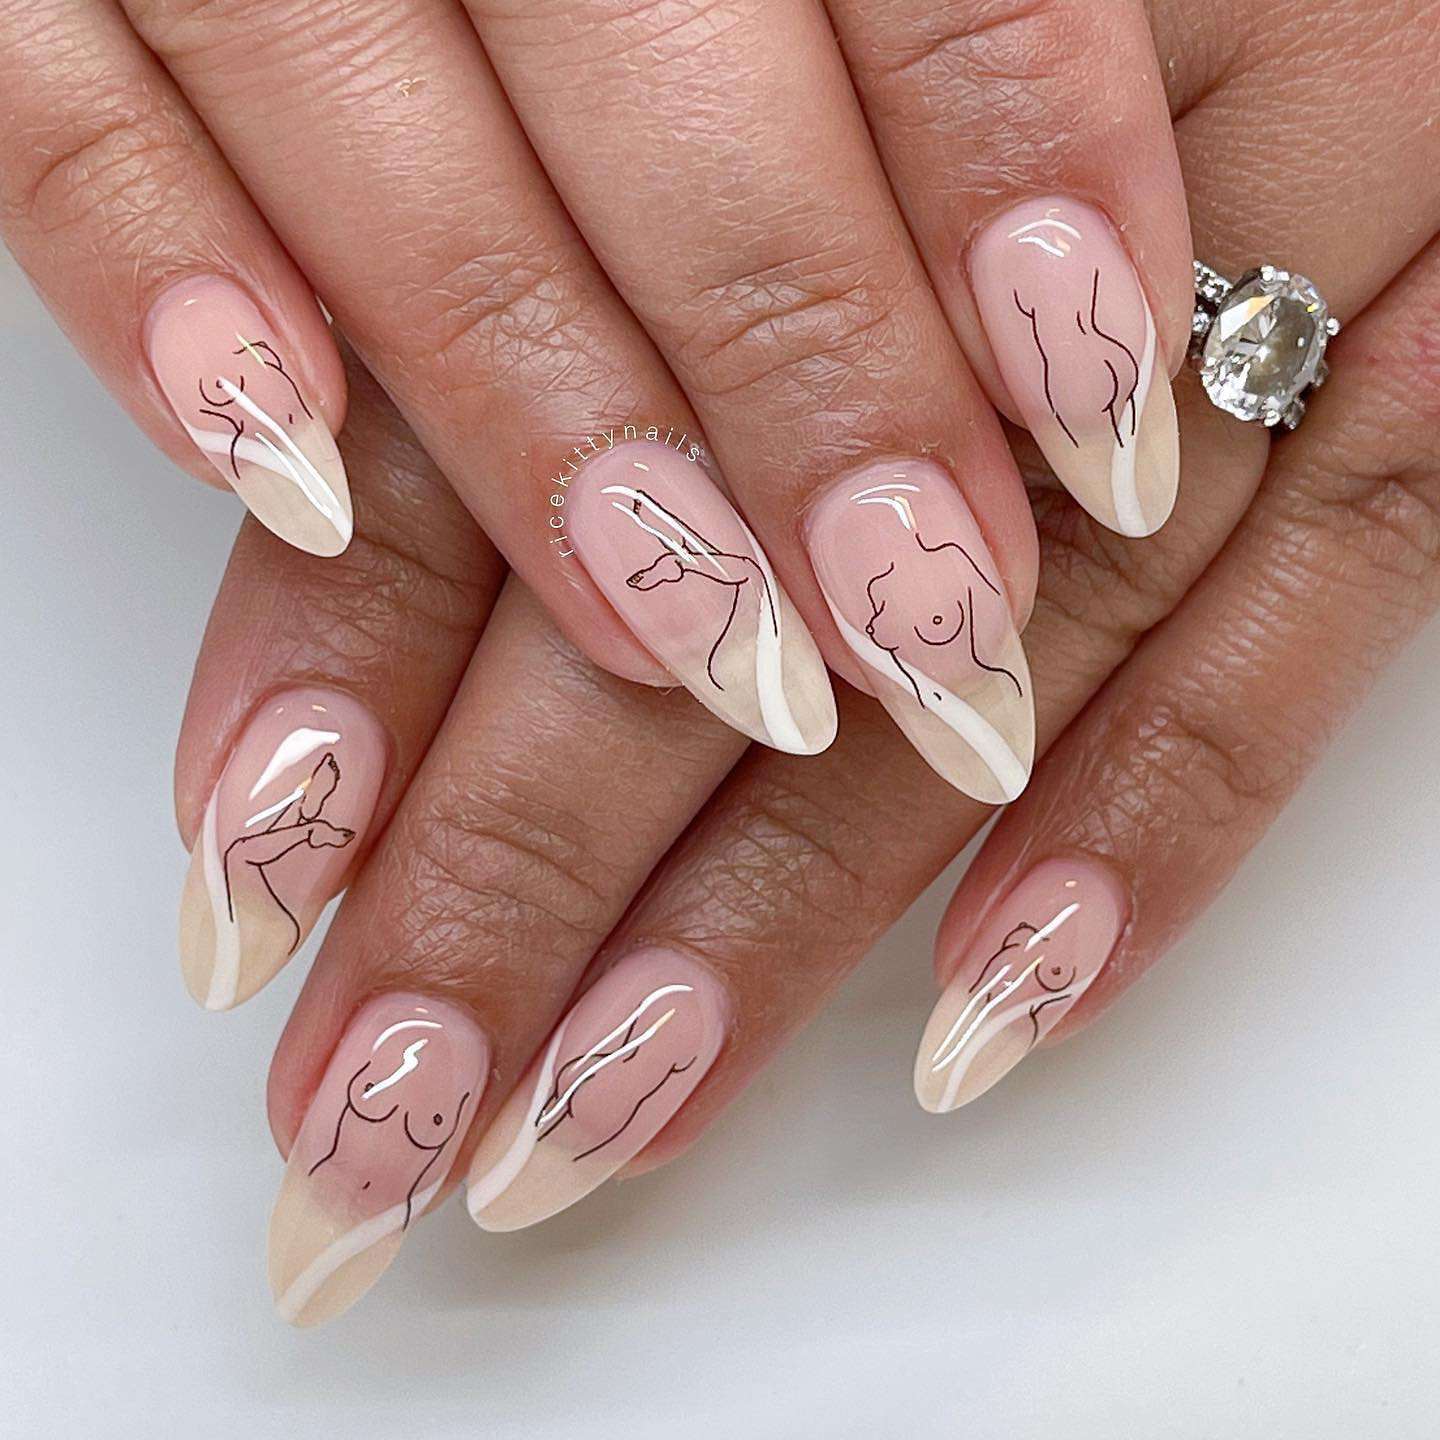 35 Nail Designs For 2022 You’ll Want To Try Immediately images 17